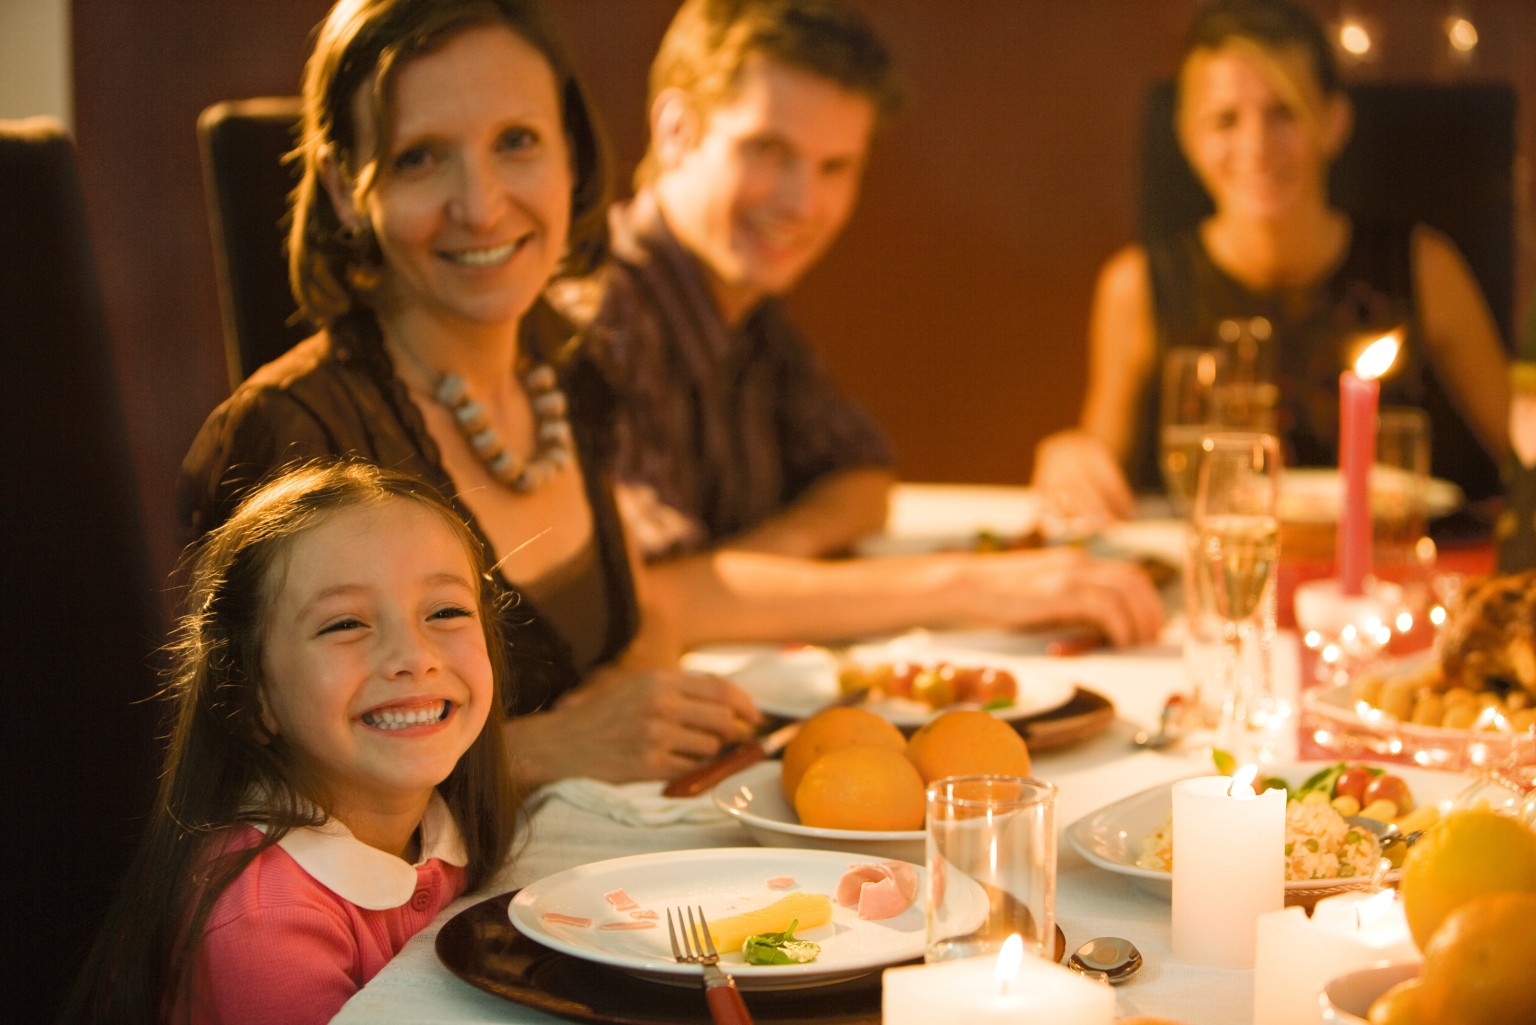 My Kids Can't Eat Out Without Being Plugged In! | HuffPost